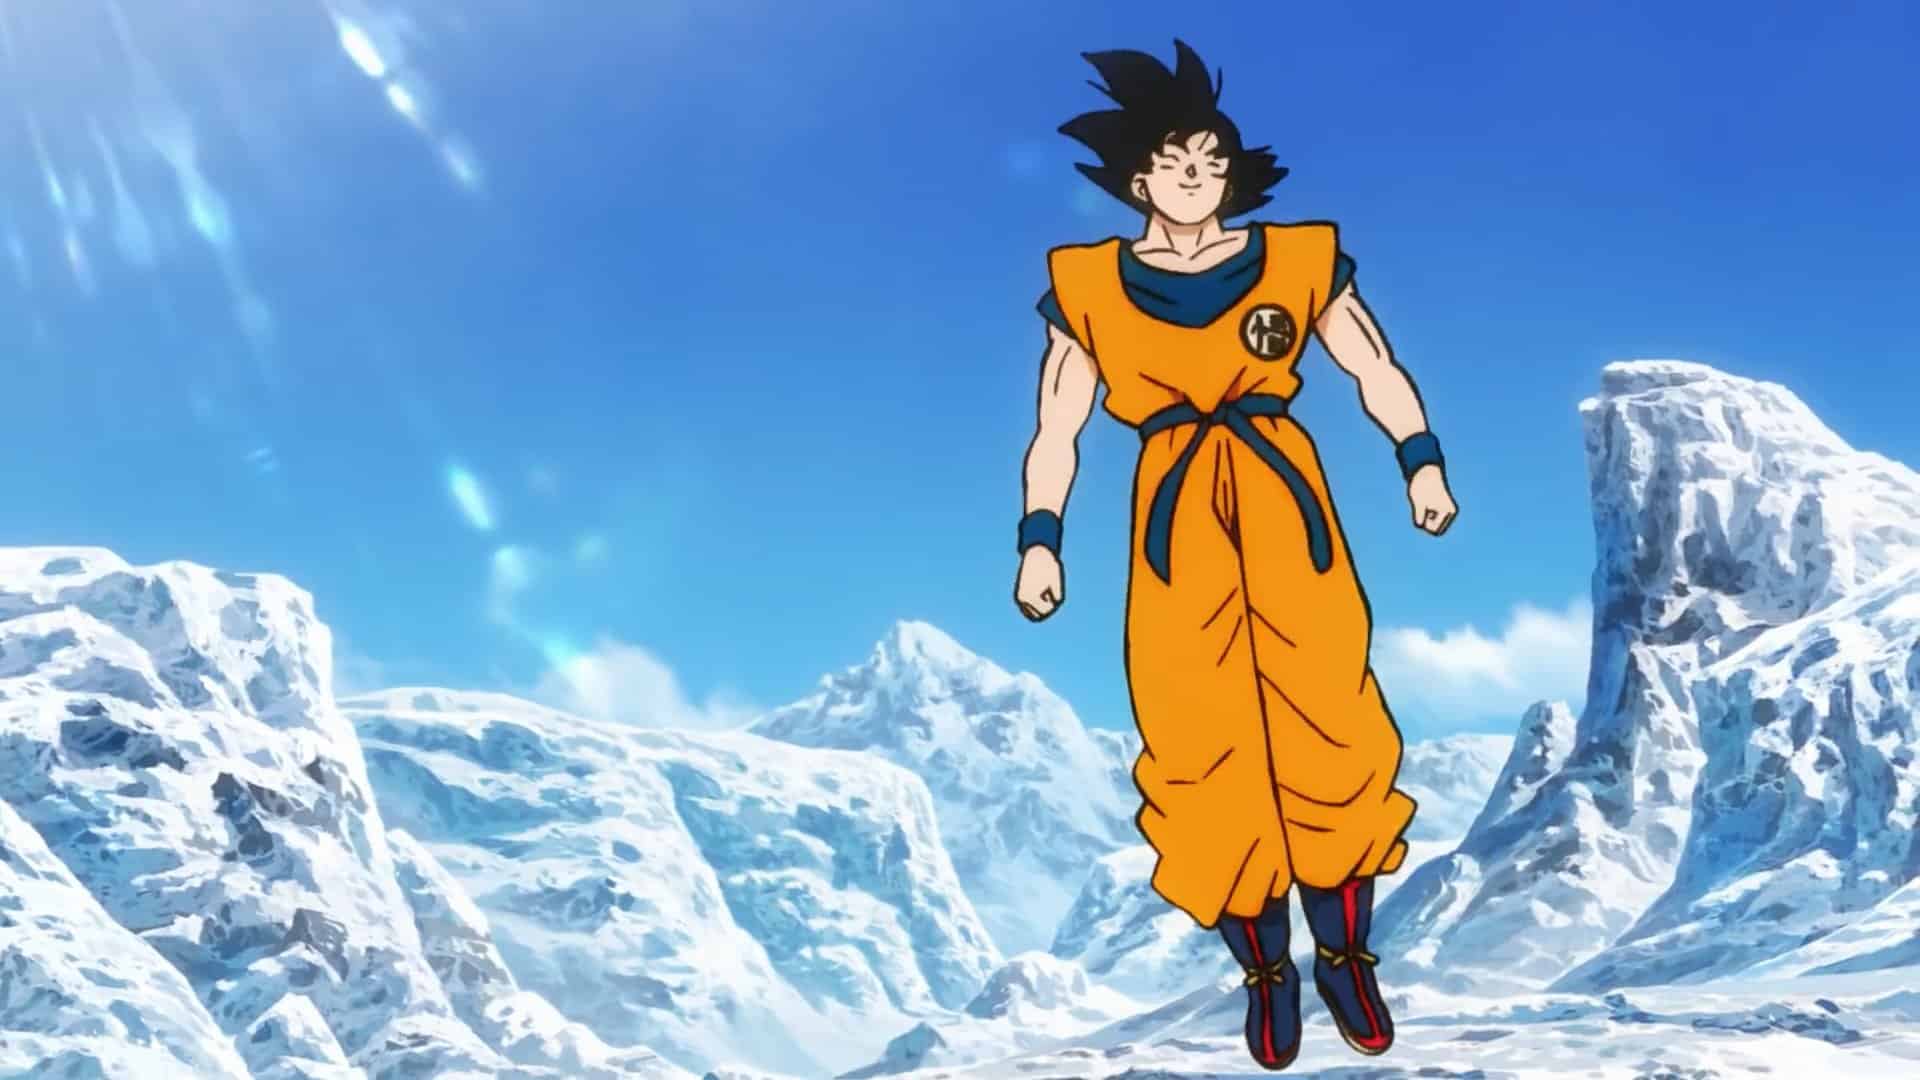 Dragon Ball Super Movie Release Date For USA, UK, India, Mexico, New